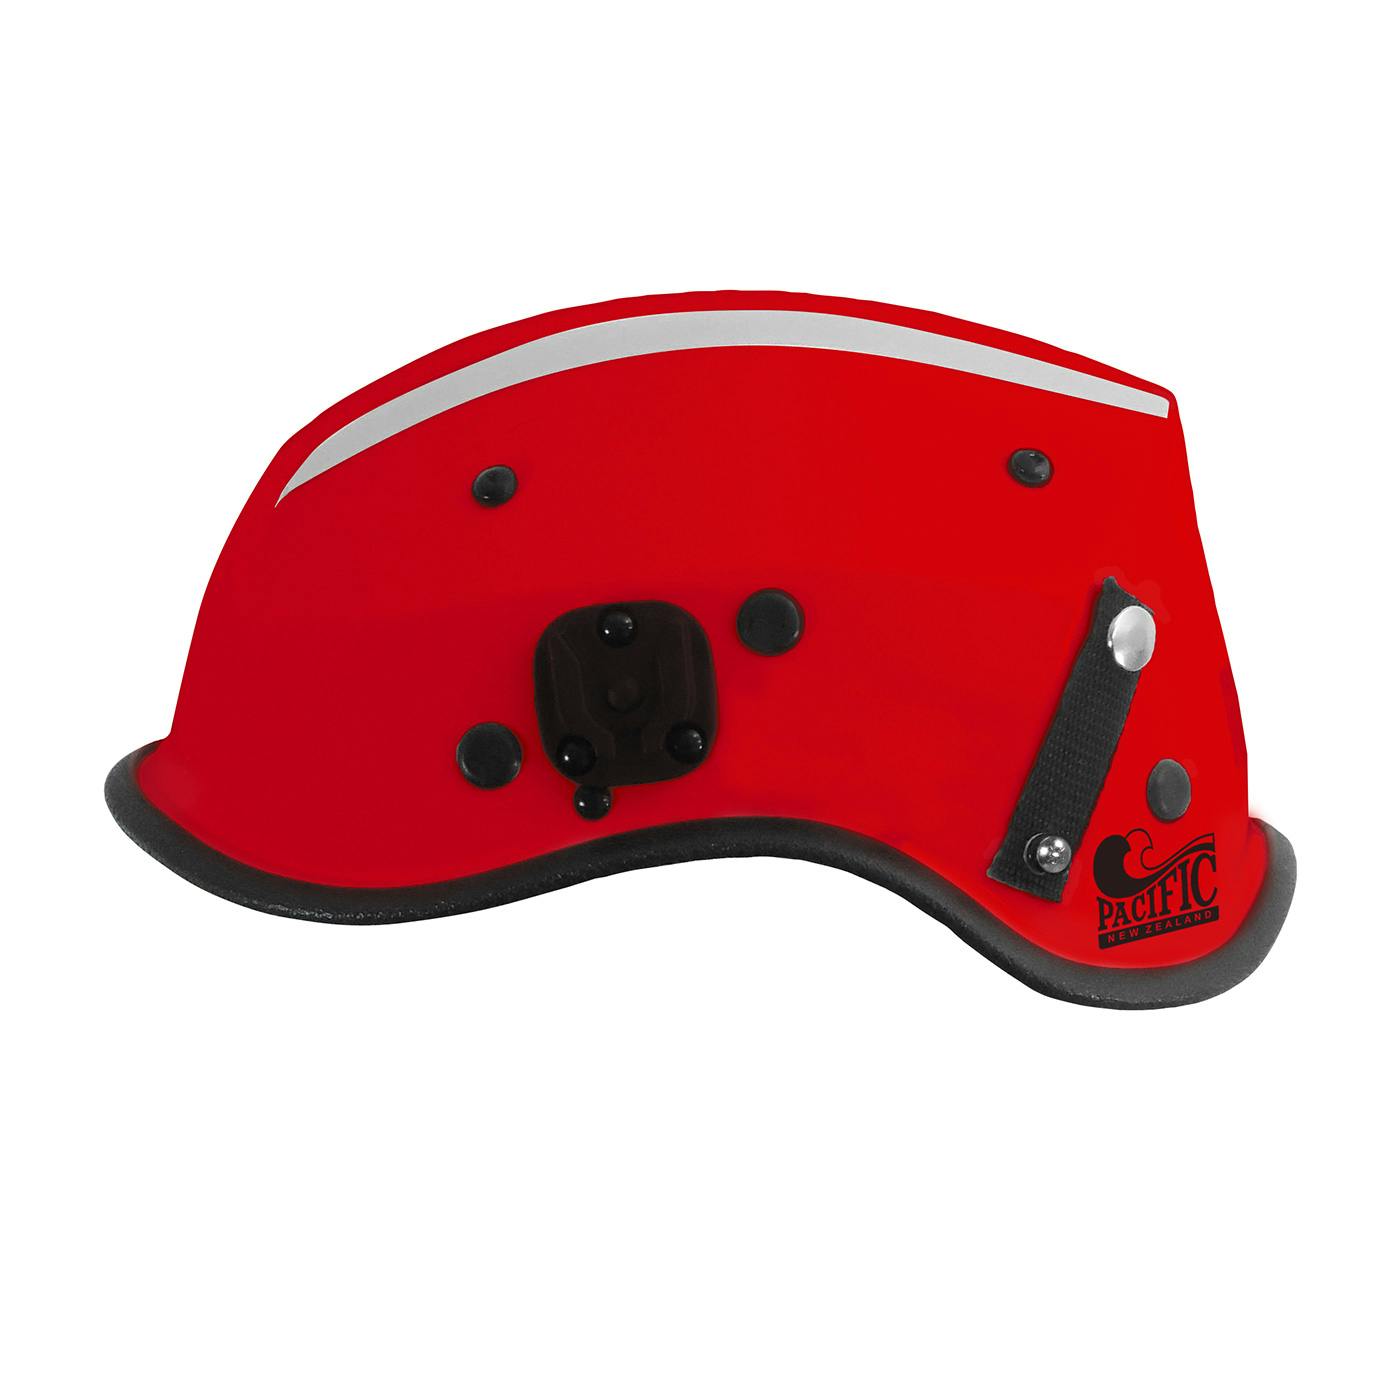 Non-Vented Rescue Helmet with Retractable Eye Protector and ESS Goggle Mounts, Red (805-35XX) - OS